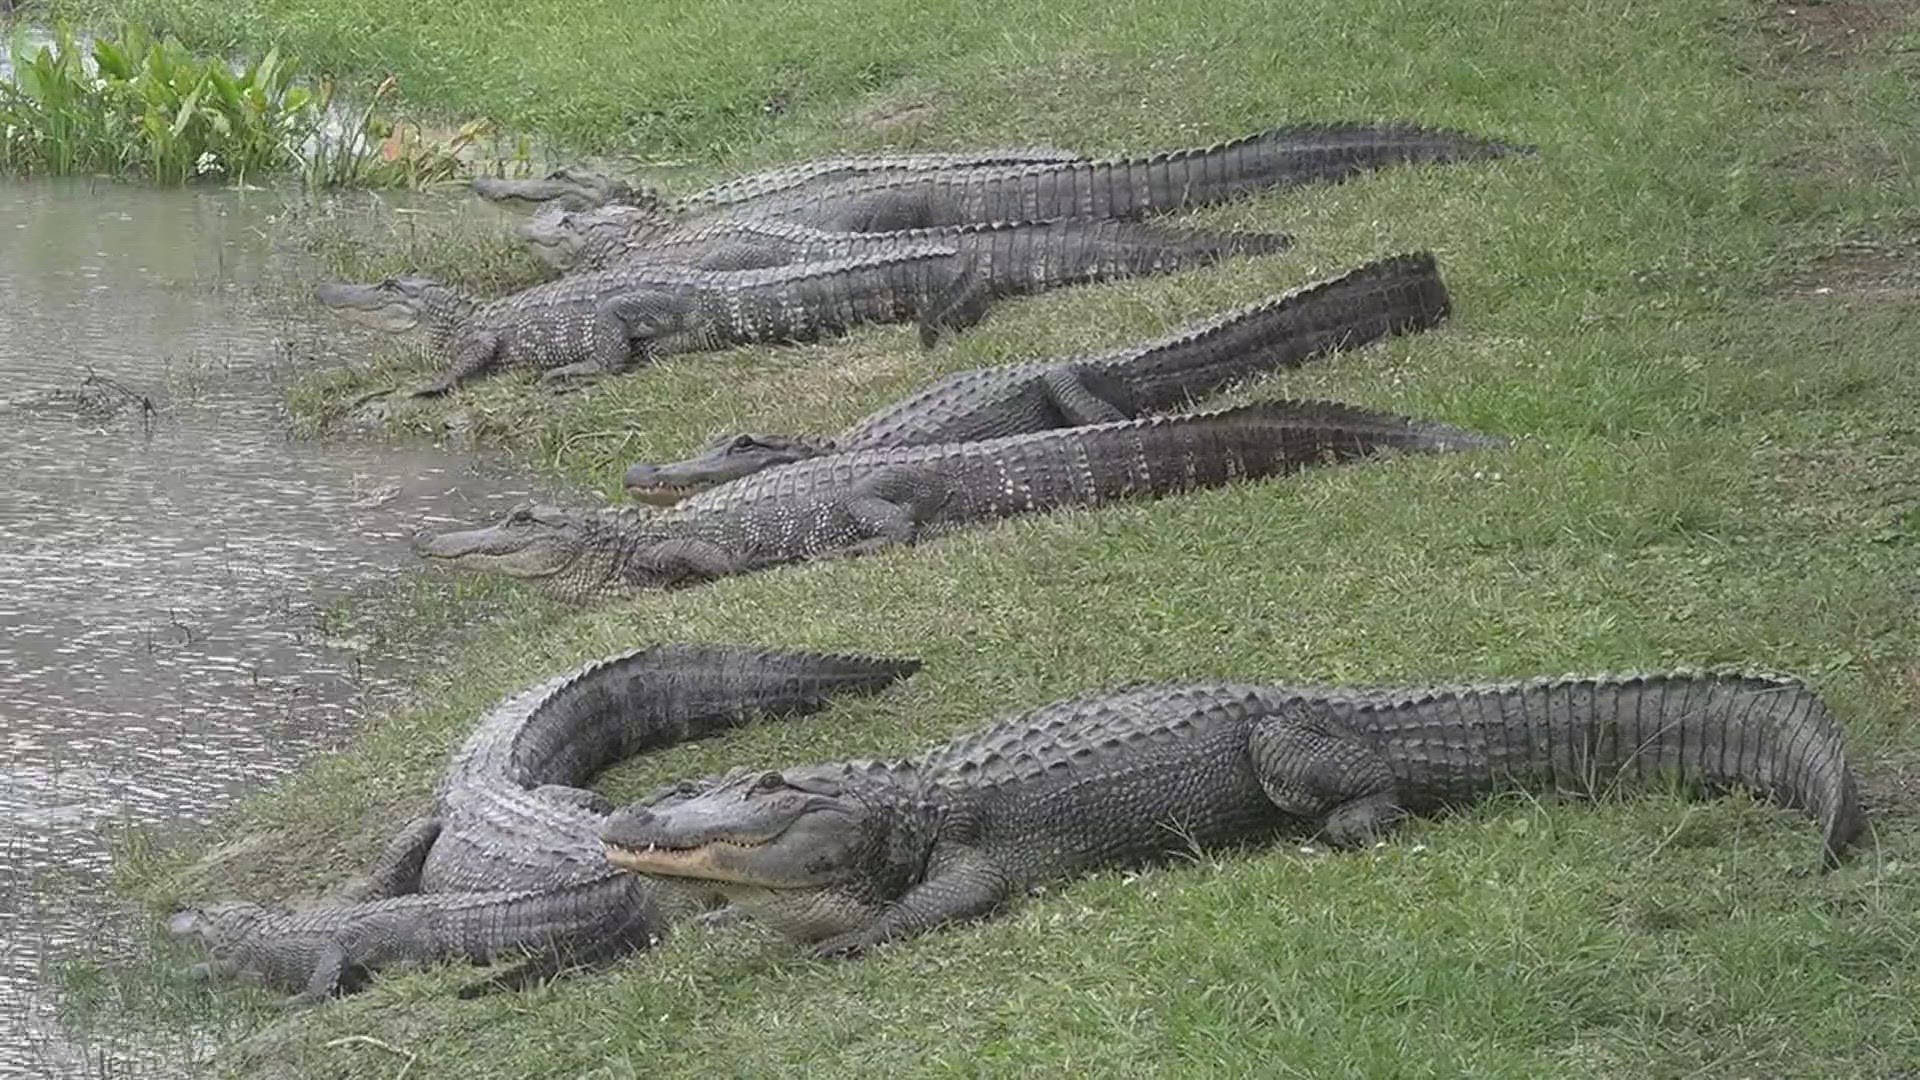 A new show, "Texas Gator Savers" follows Gary Saurage and his team at Gator Country across Southeast Texas as they do what they do best.